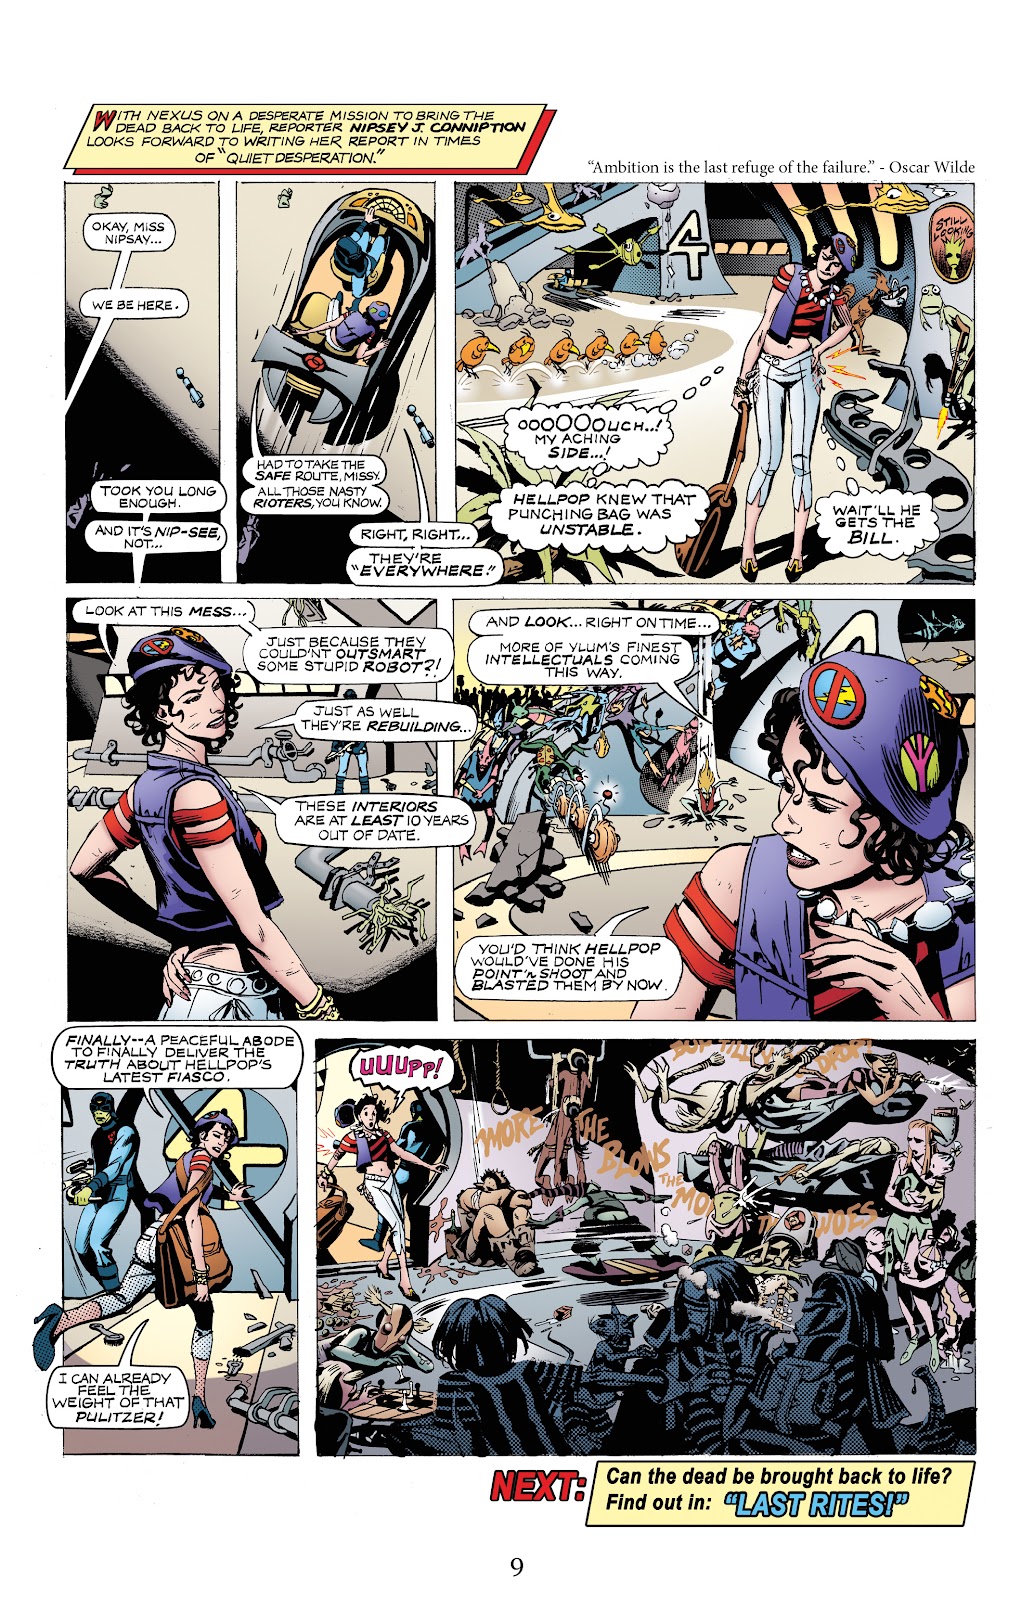 Nexus Newspaper Strips Vol 2: The Battle For Thuneworld issue 1 - Page 11